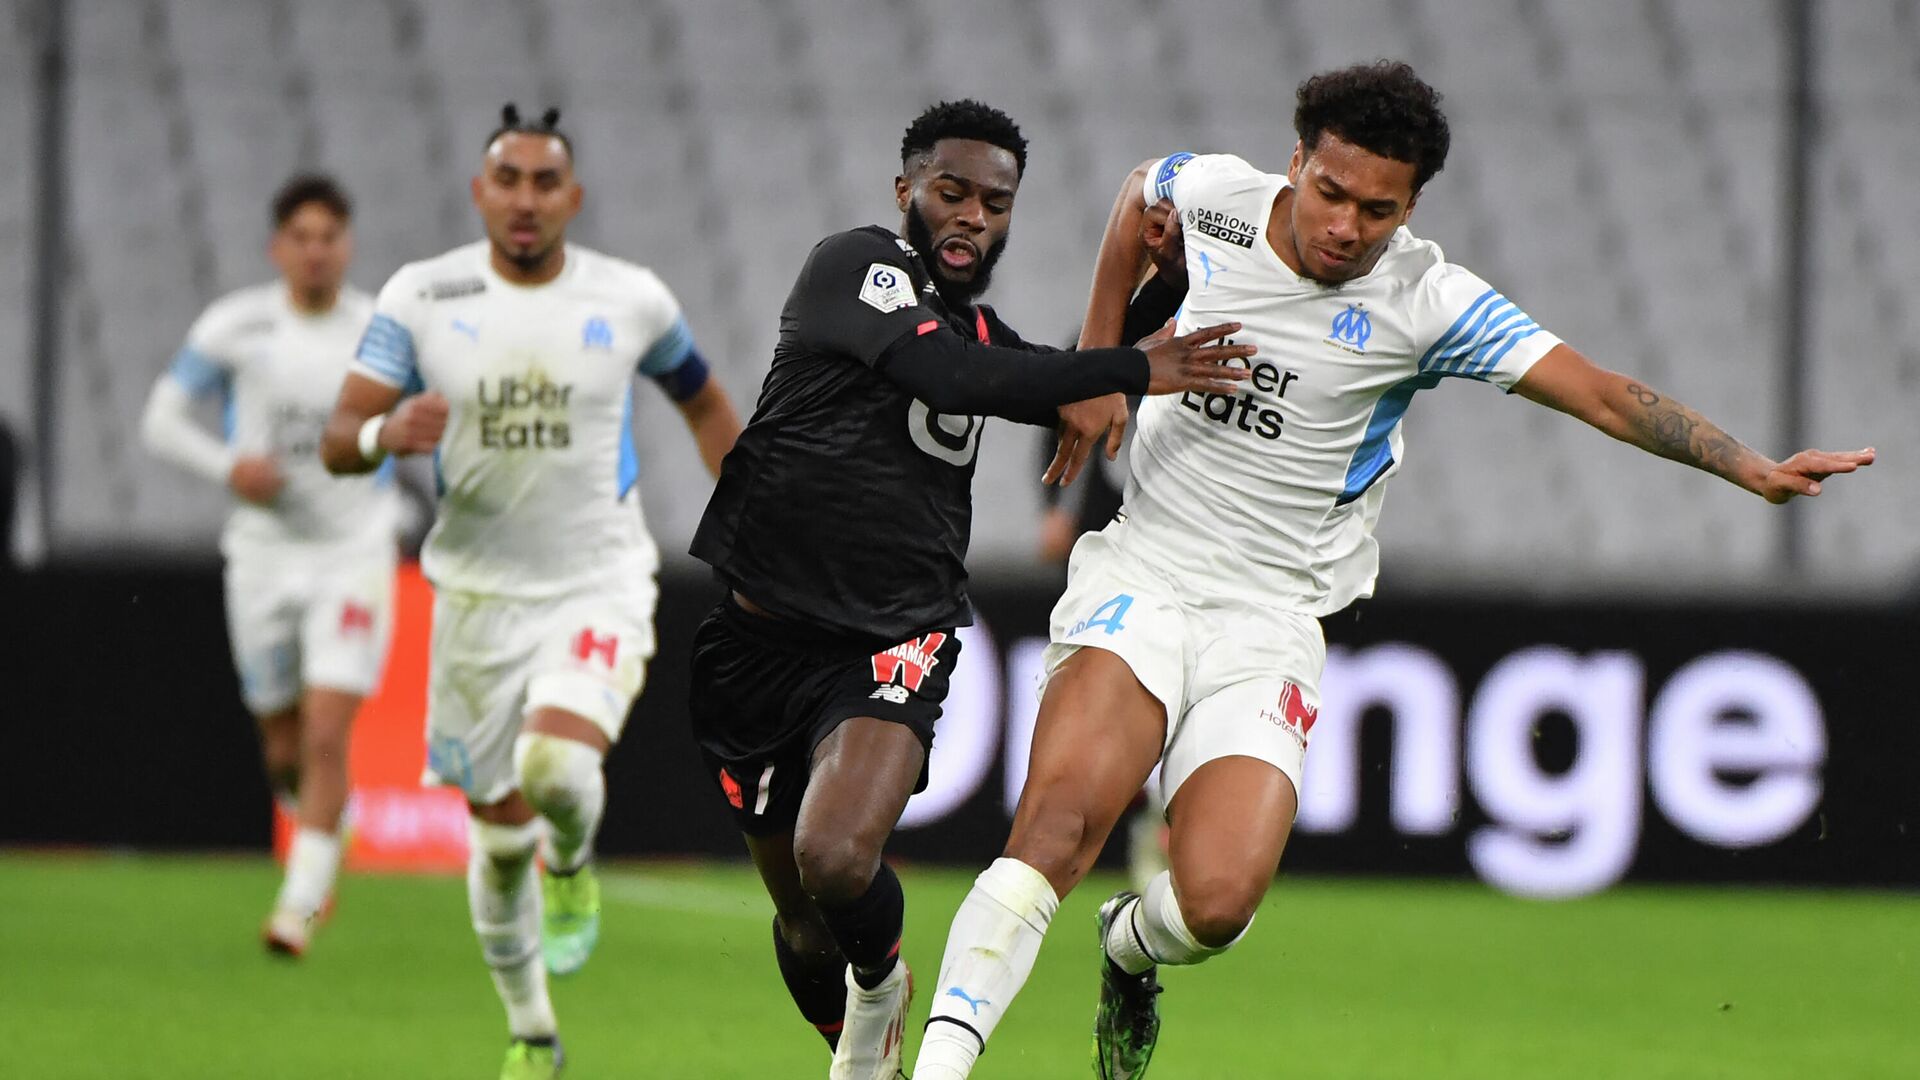 Lille's French midfielder Jonathan Bamba (L) fights for the ball with Marseille's French defender Boubacar Kamara during the French L1 football match between Olympique Marseille (OM) and Lille OSC at the Velodrome Stadium in Marseille, southern France, on January 16, 2022. (Photo by Sylvain THOMAS / AFP) - РИА Новости, 1920, 17.01.2022